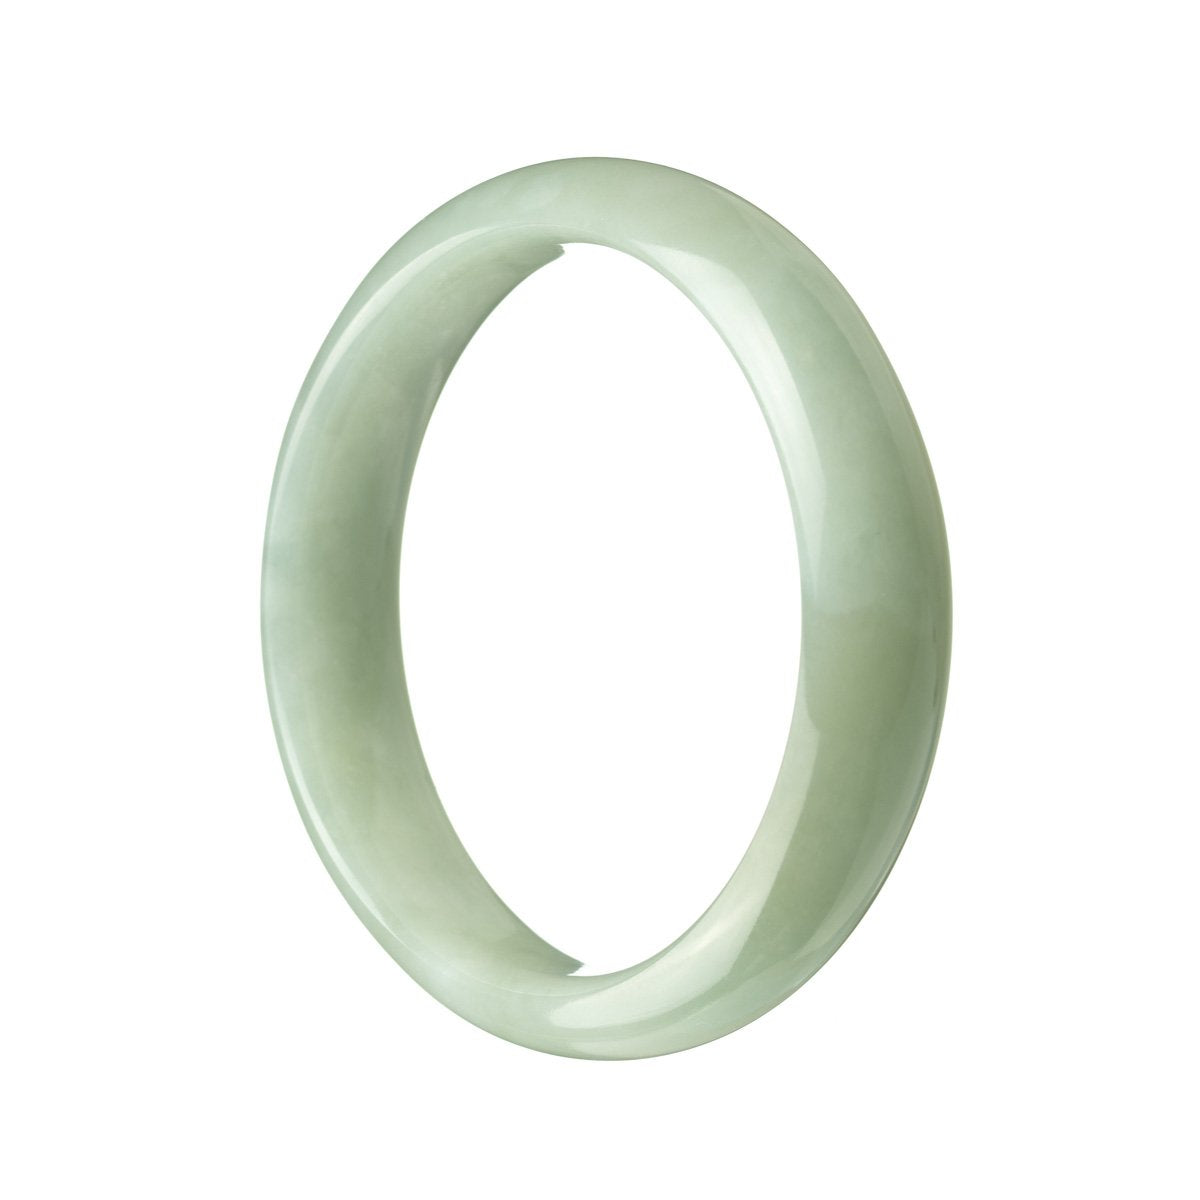 A beautiful light green Burma jade bangle bracelet with a half moon shape, made from high-quality grade A jade. Perfect for adding a touch of elegance to any outfit.